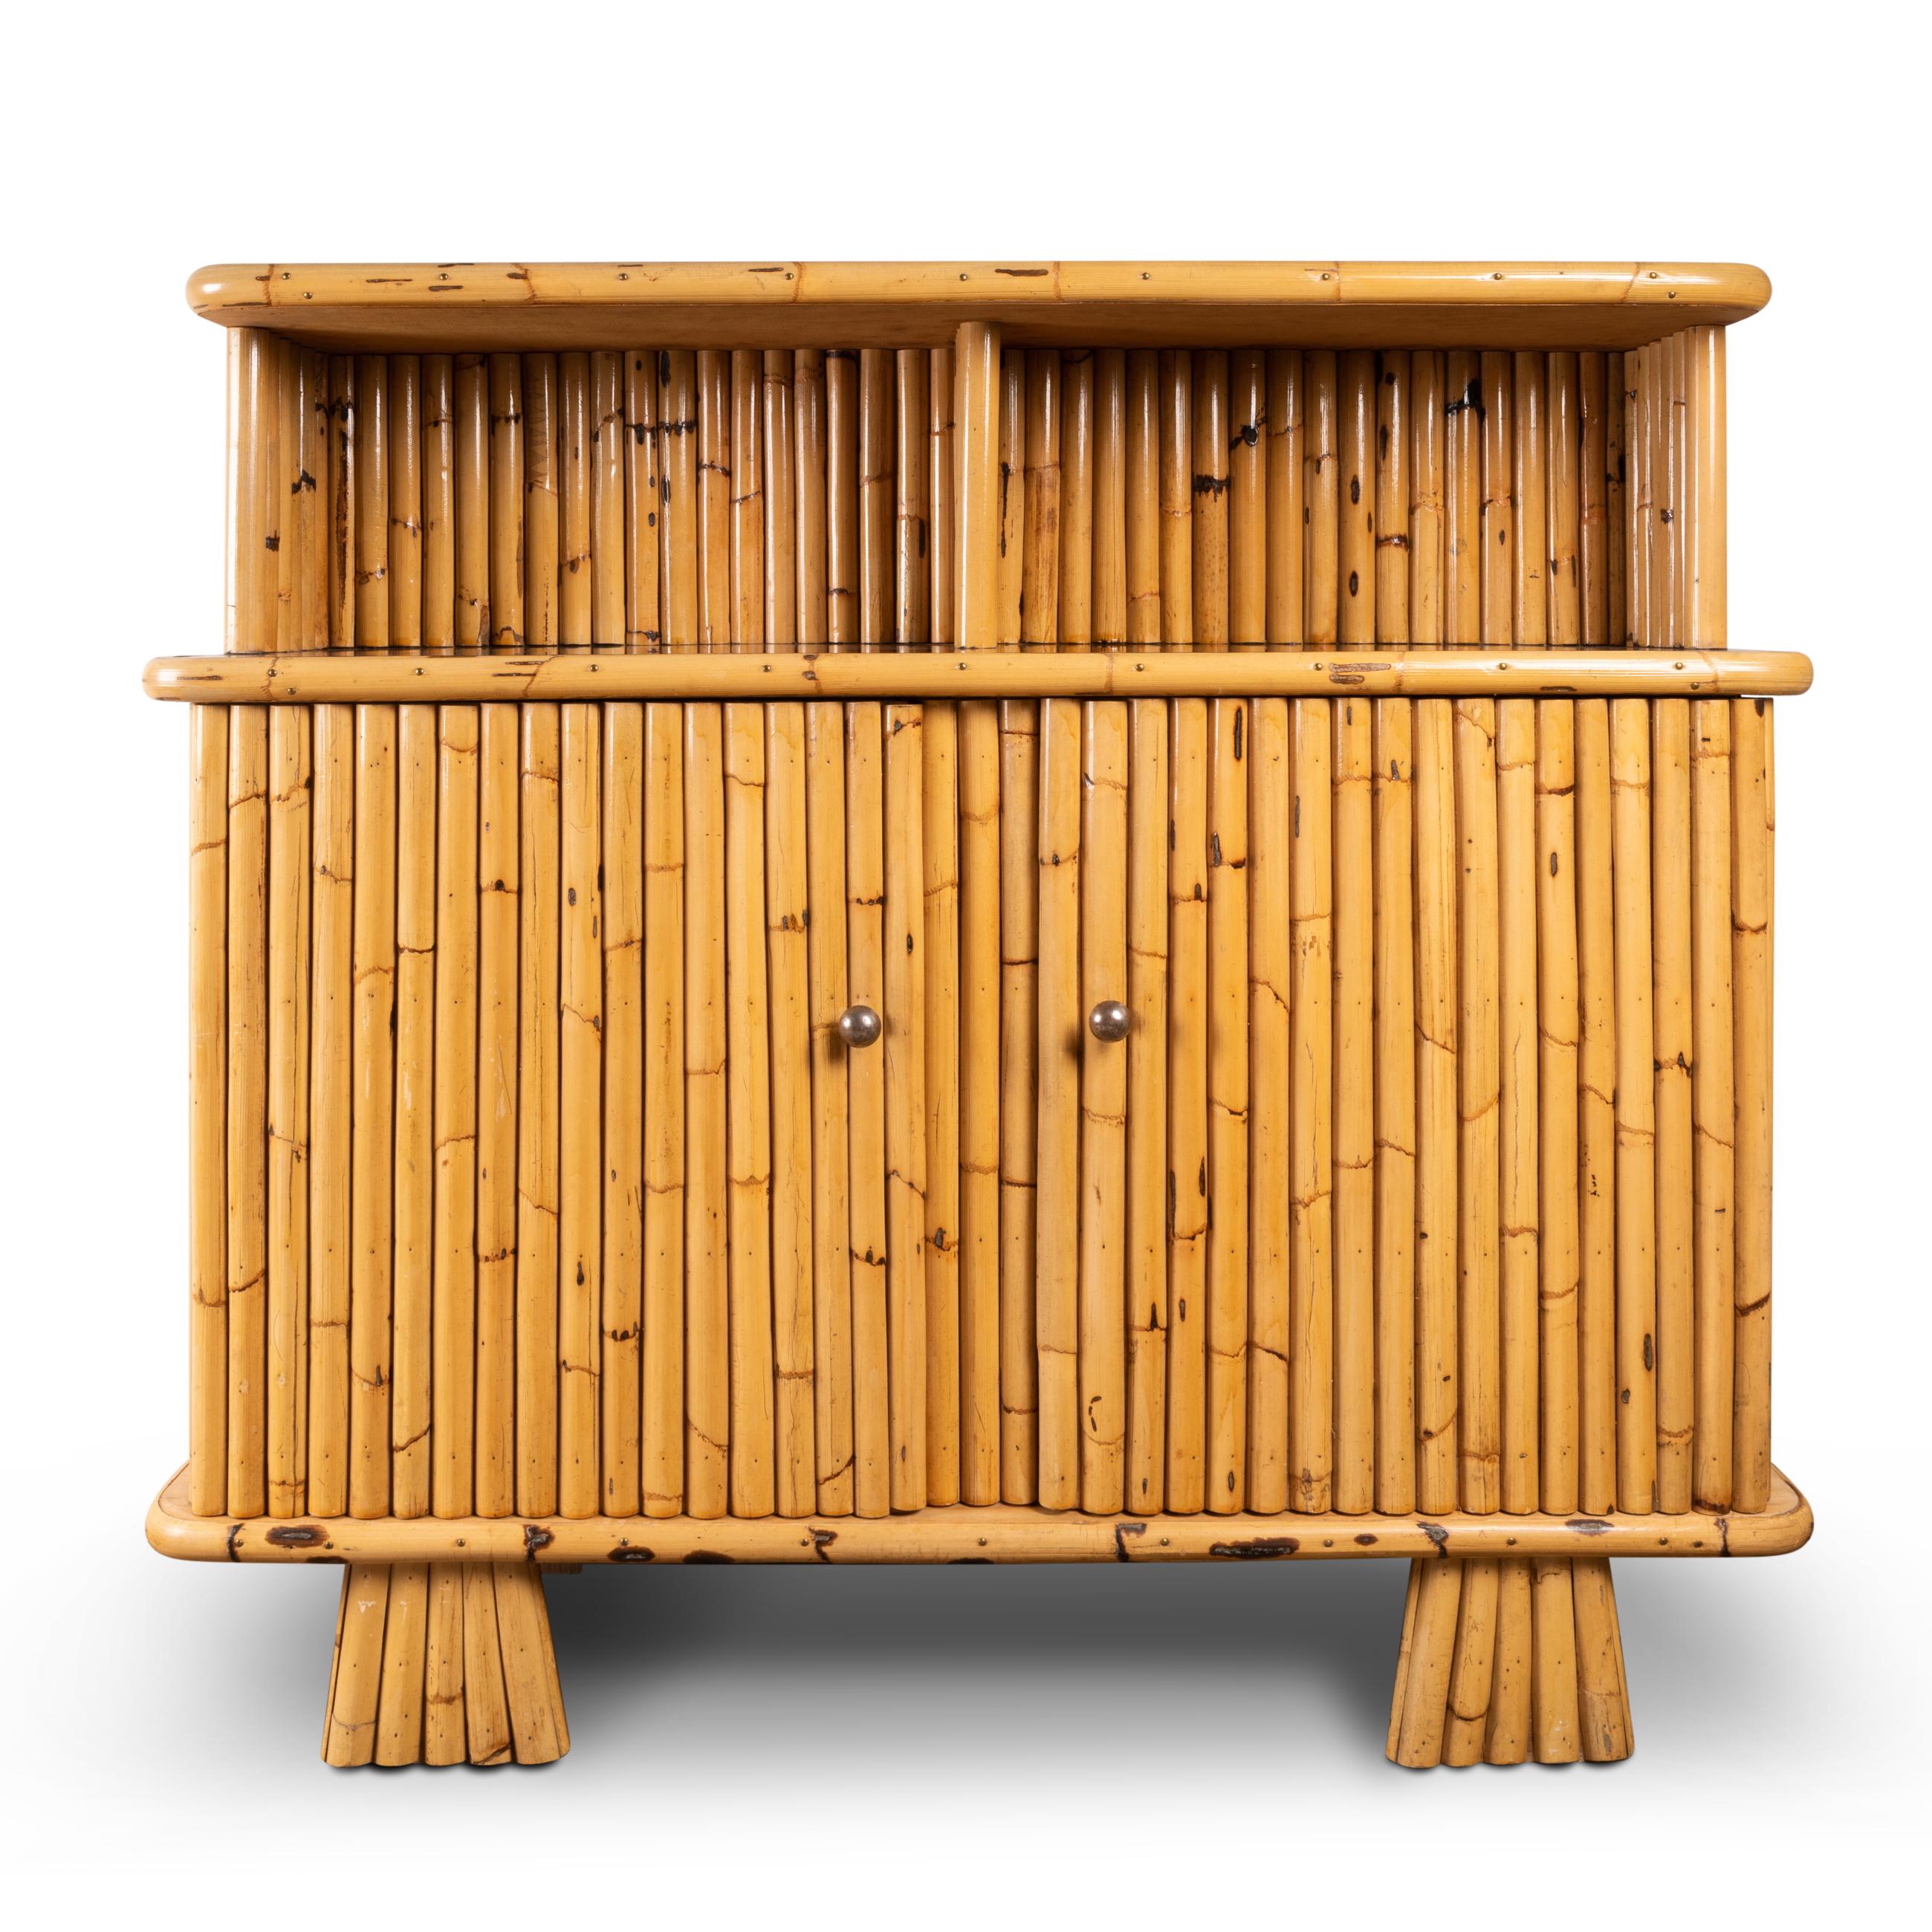 Rattan buffet opening with 2 doors.
With two black lacquered shelves
South of France, 
Circa 1970. 
This well proportioned buffet evokes the 